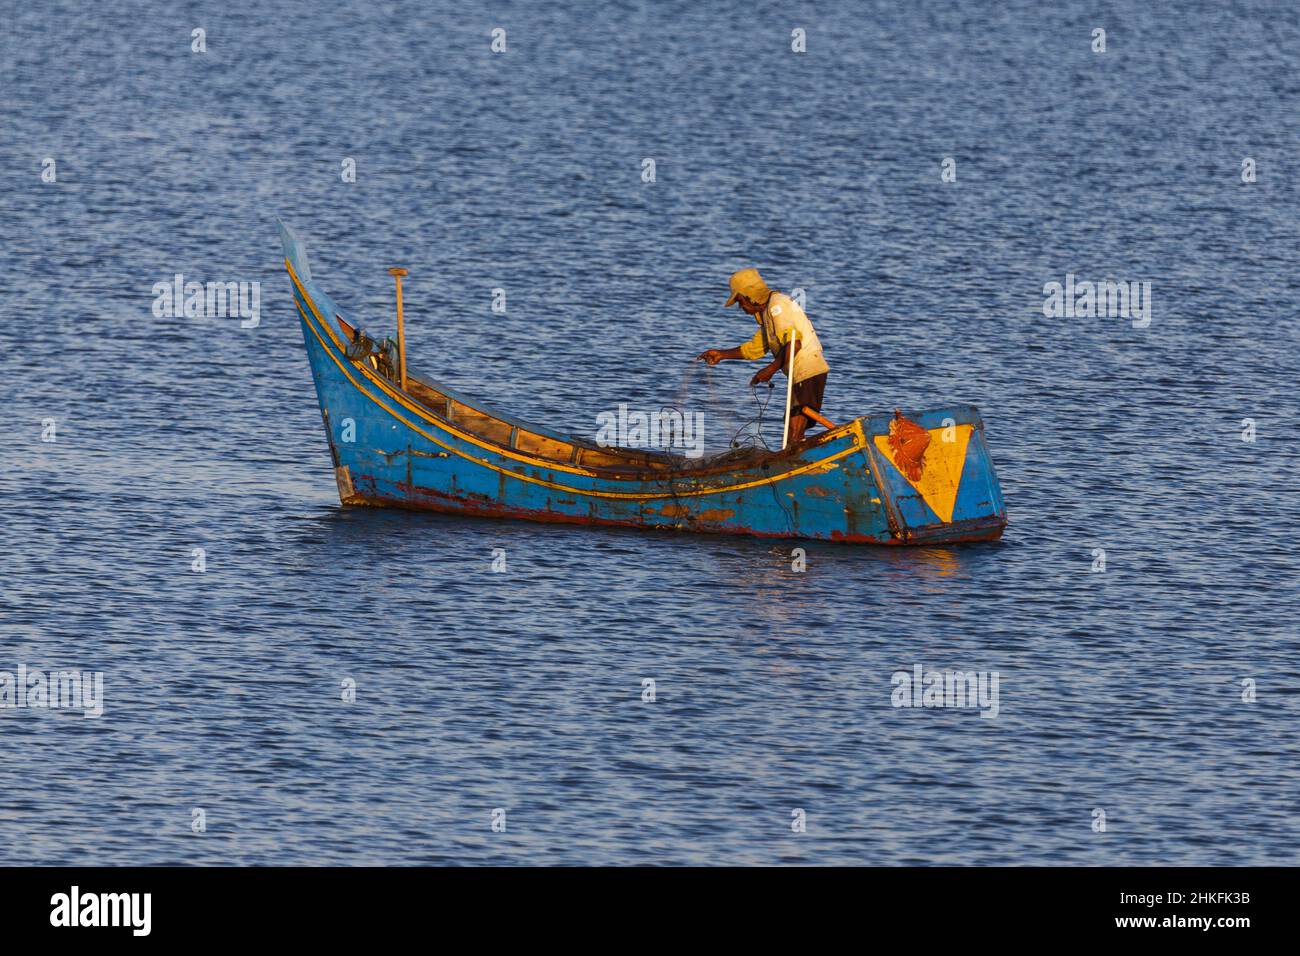 Fishing boat and fisherman in the sea at dawn in Banda Aceh, Indonesia Stock Photo